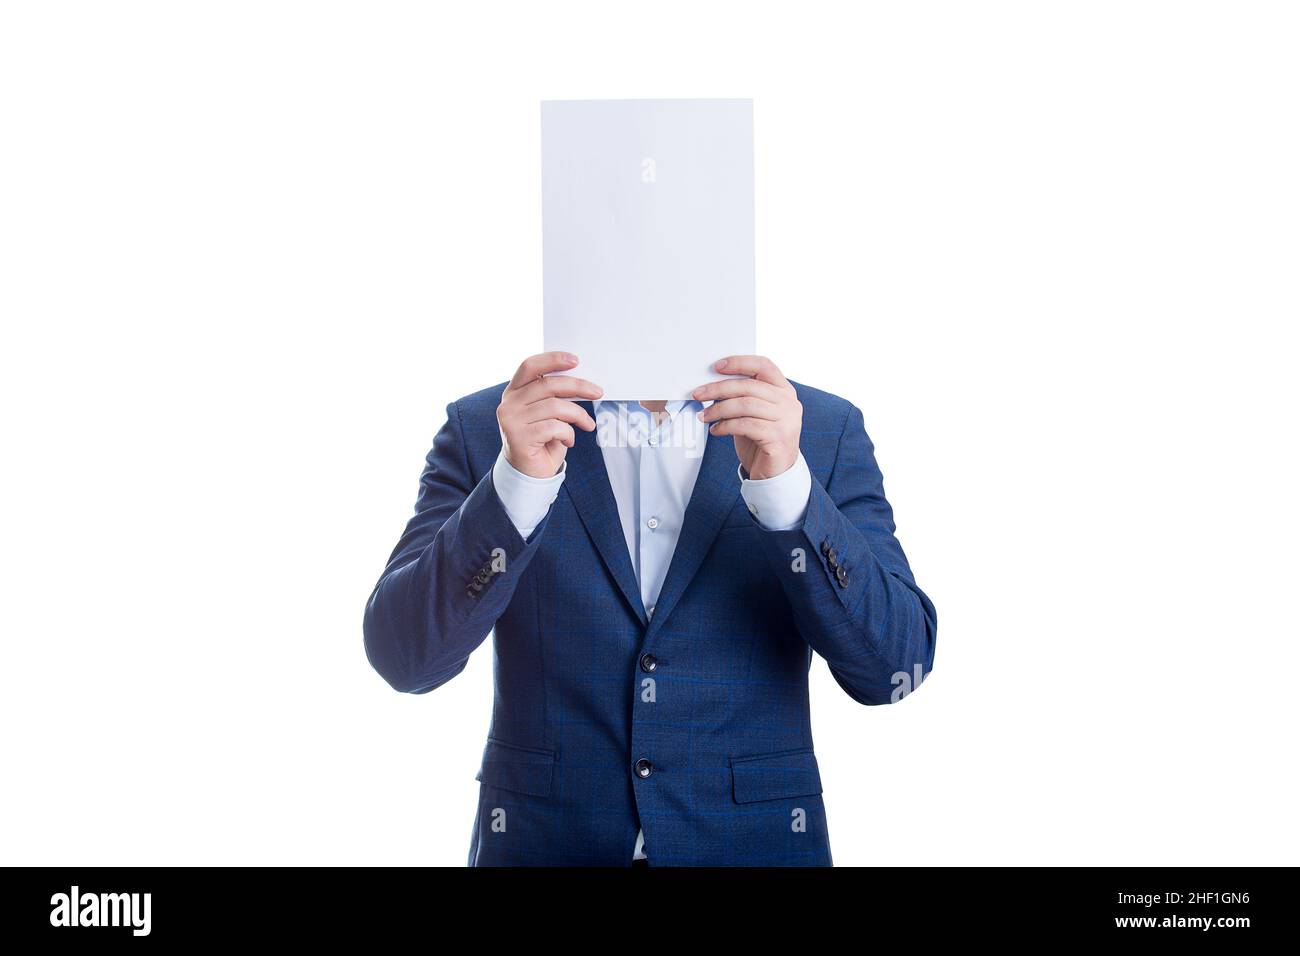 Anonymous businessman covering face with a blank paper sheet, like a mask to hide emotions. Incognito person hidden, isolated on white background. Int Stock Photo